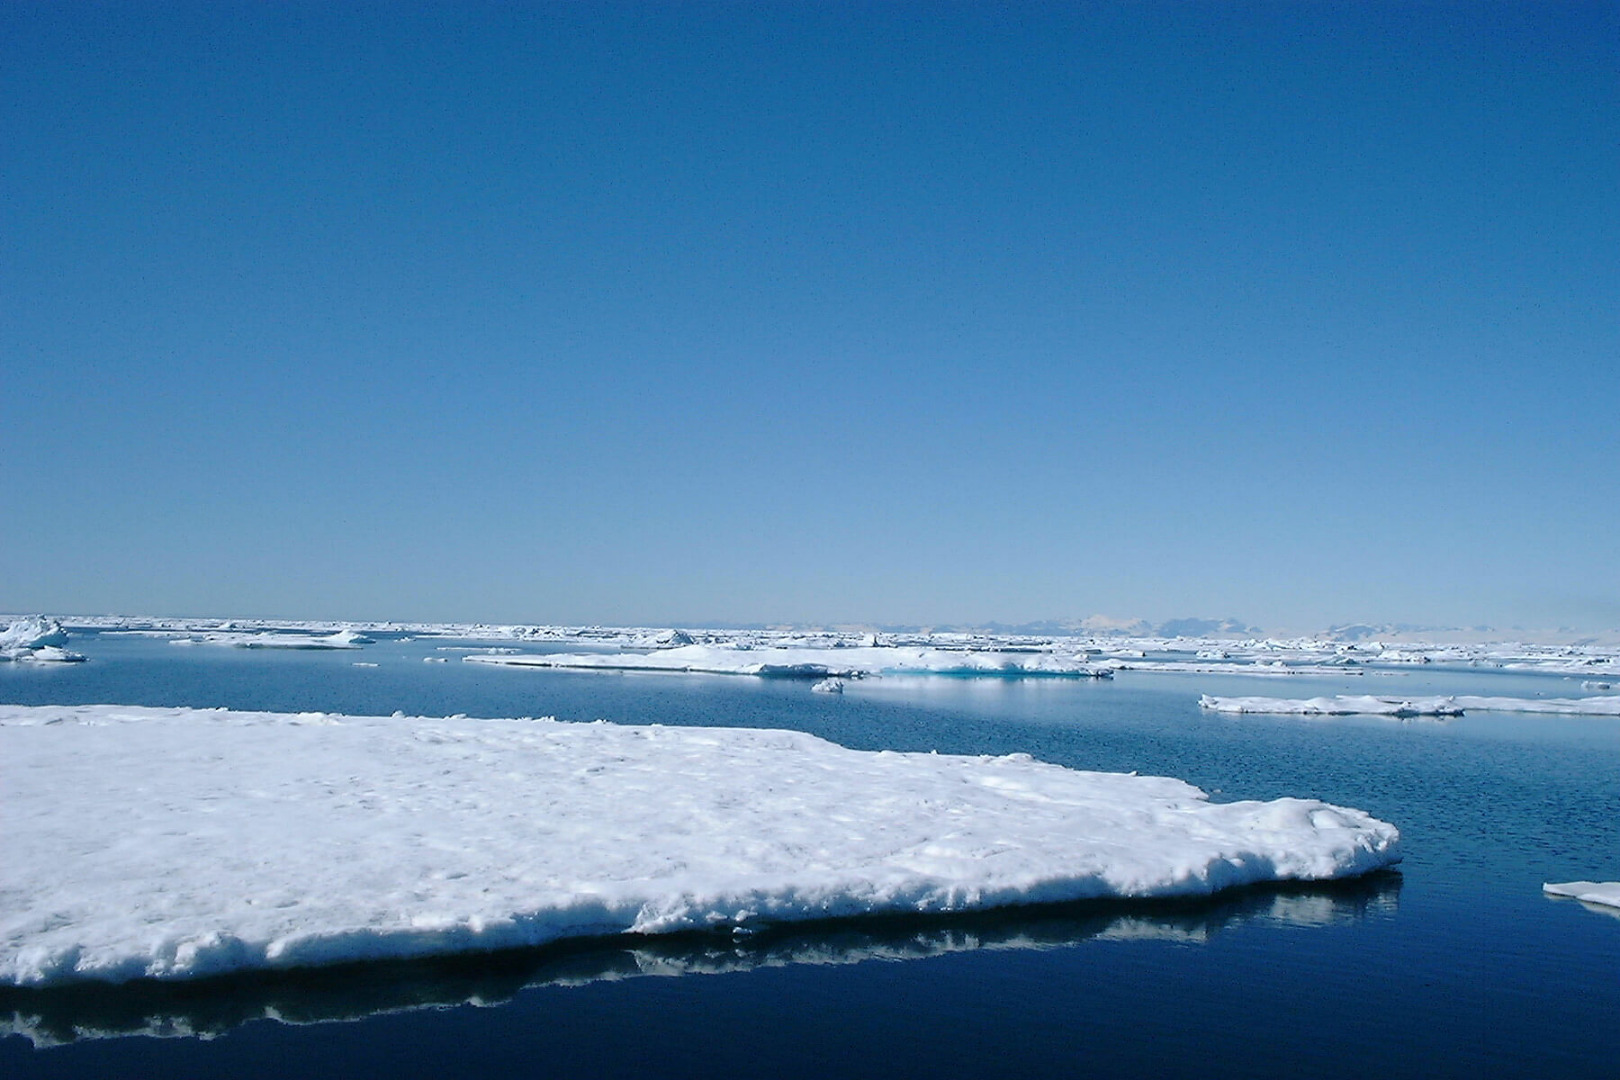 This photograph of ice flows off East Greenland above the Arctic Circle, was taken by yacht designer Merfyn Owen during an expedition in 2004. As part of Owen Clarke Design, he now helps design ice strengthened yachts which also allow for ice accretion in high latitudes